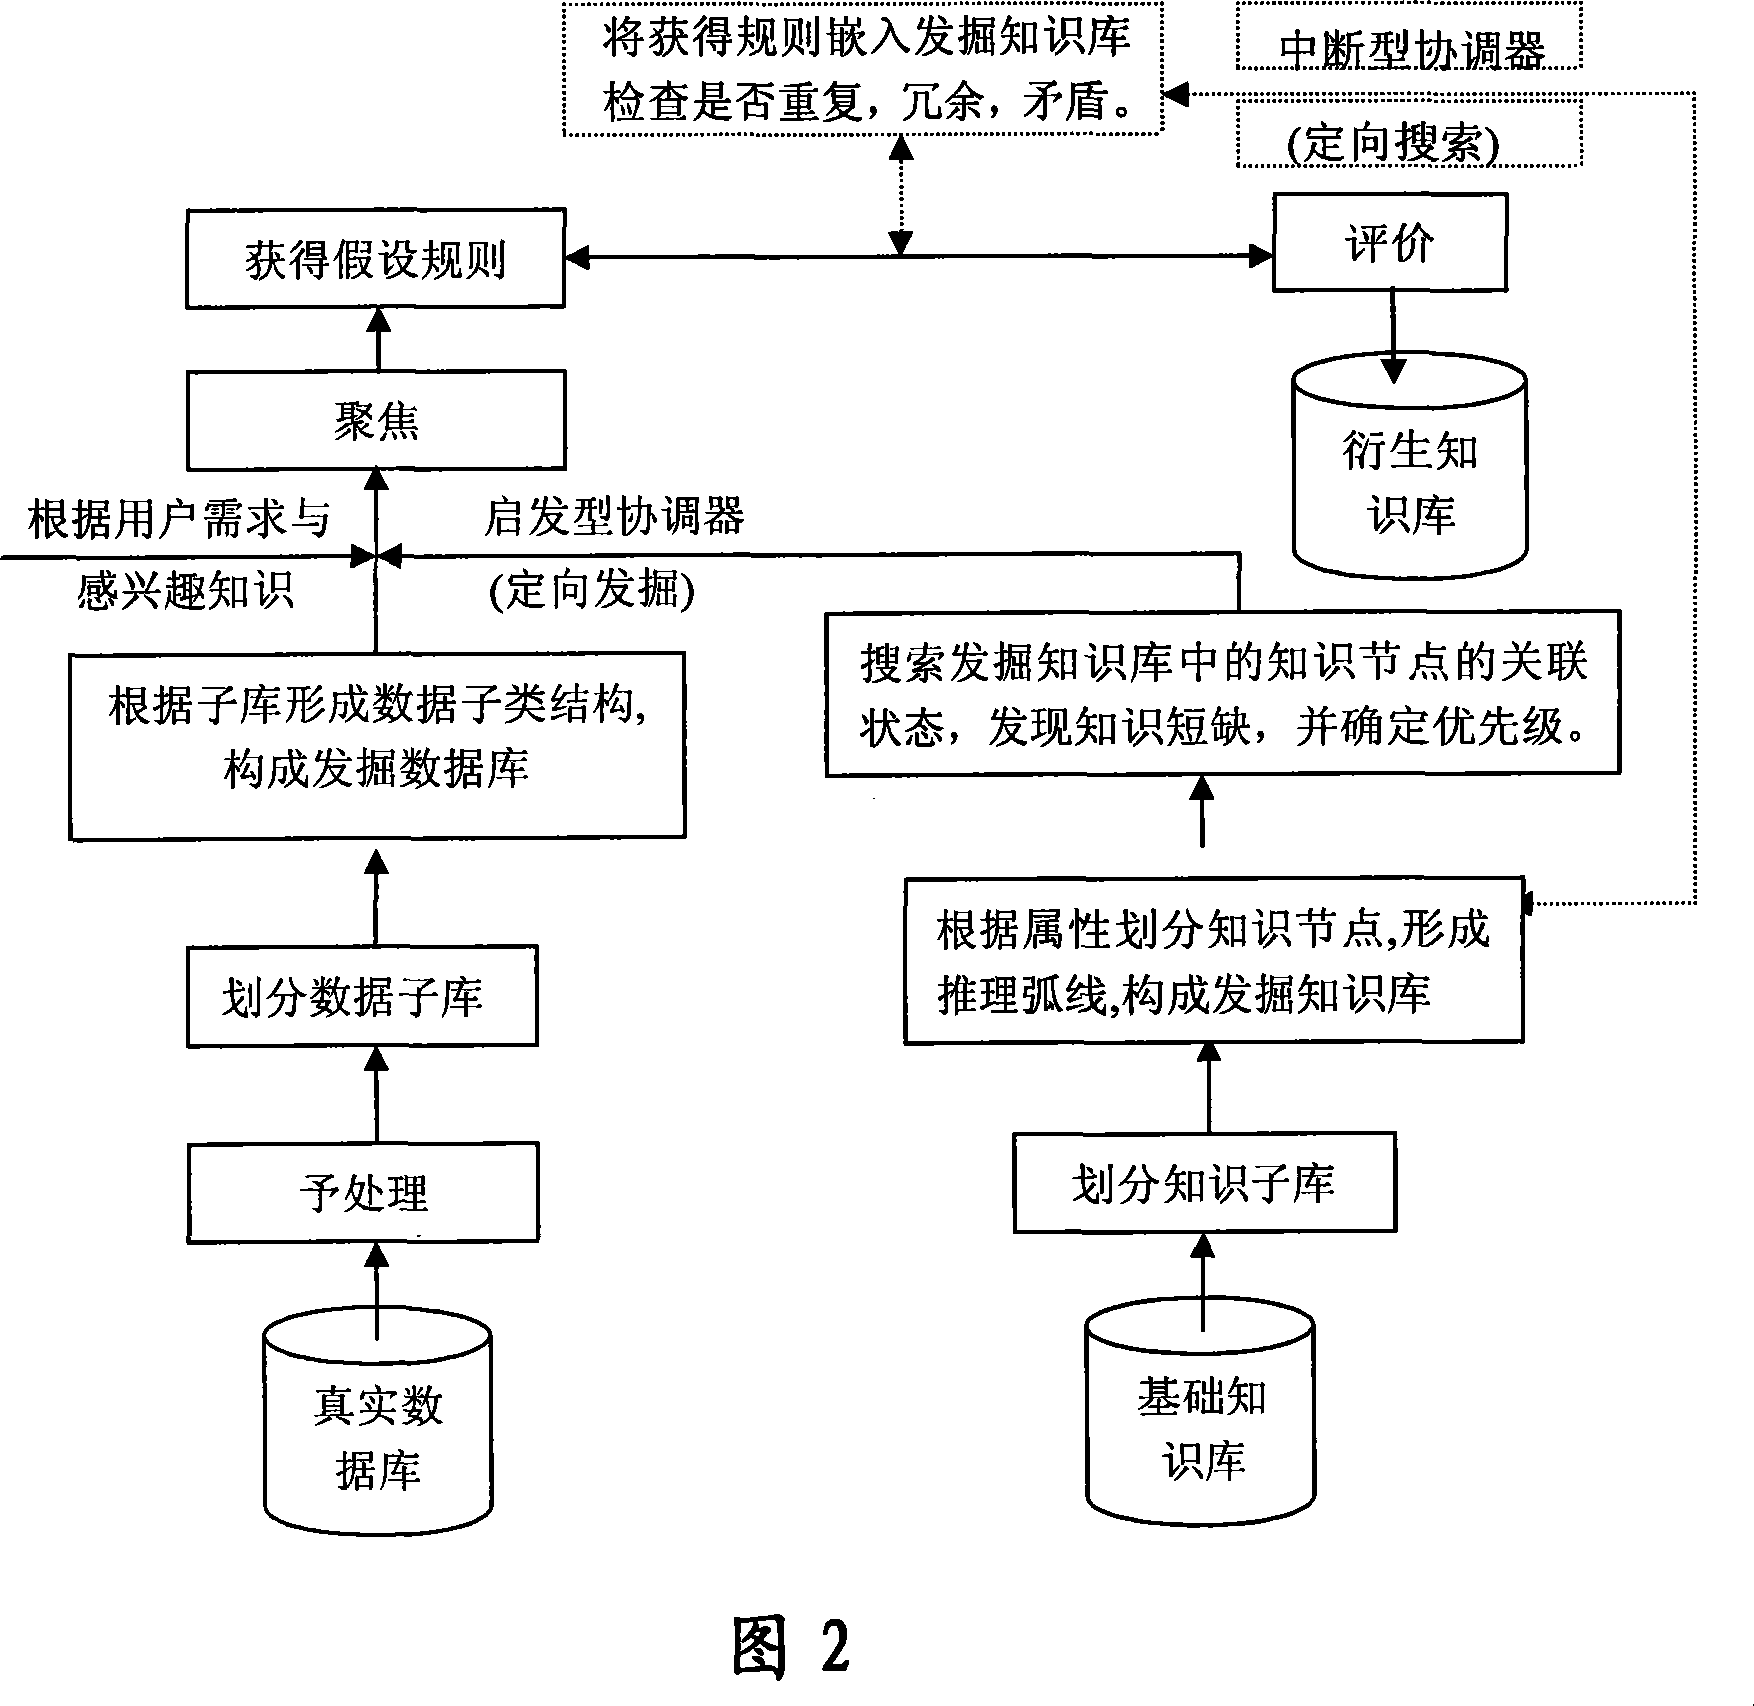 Method for constructing expert system based on knowledge discovery